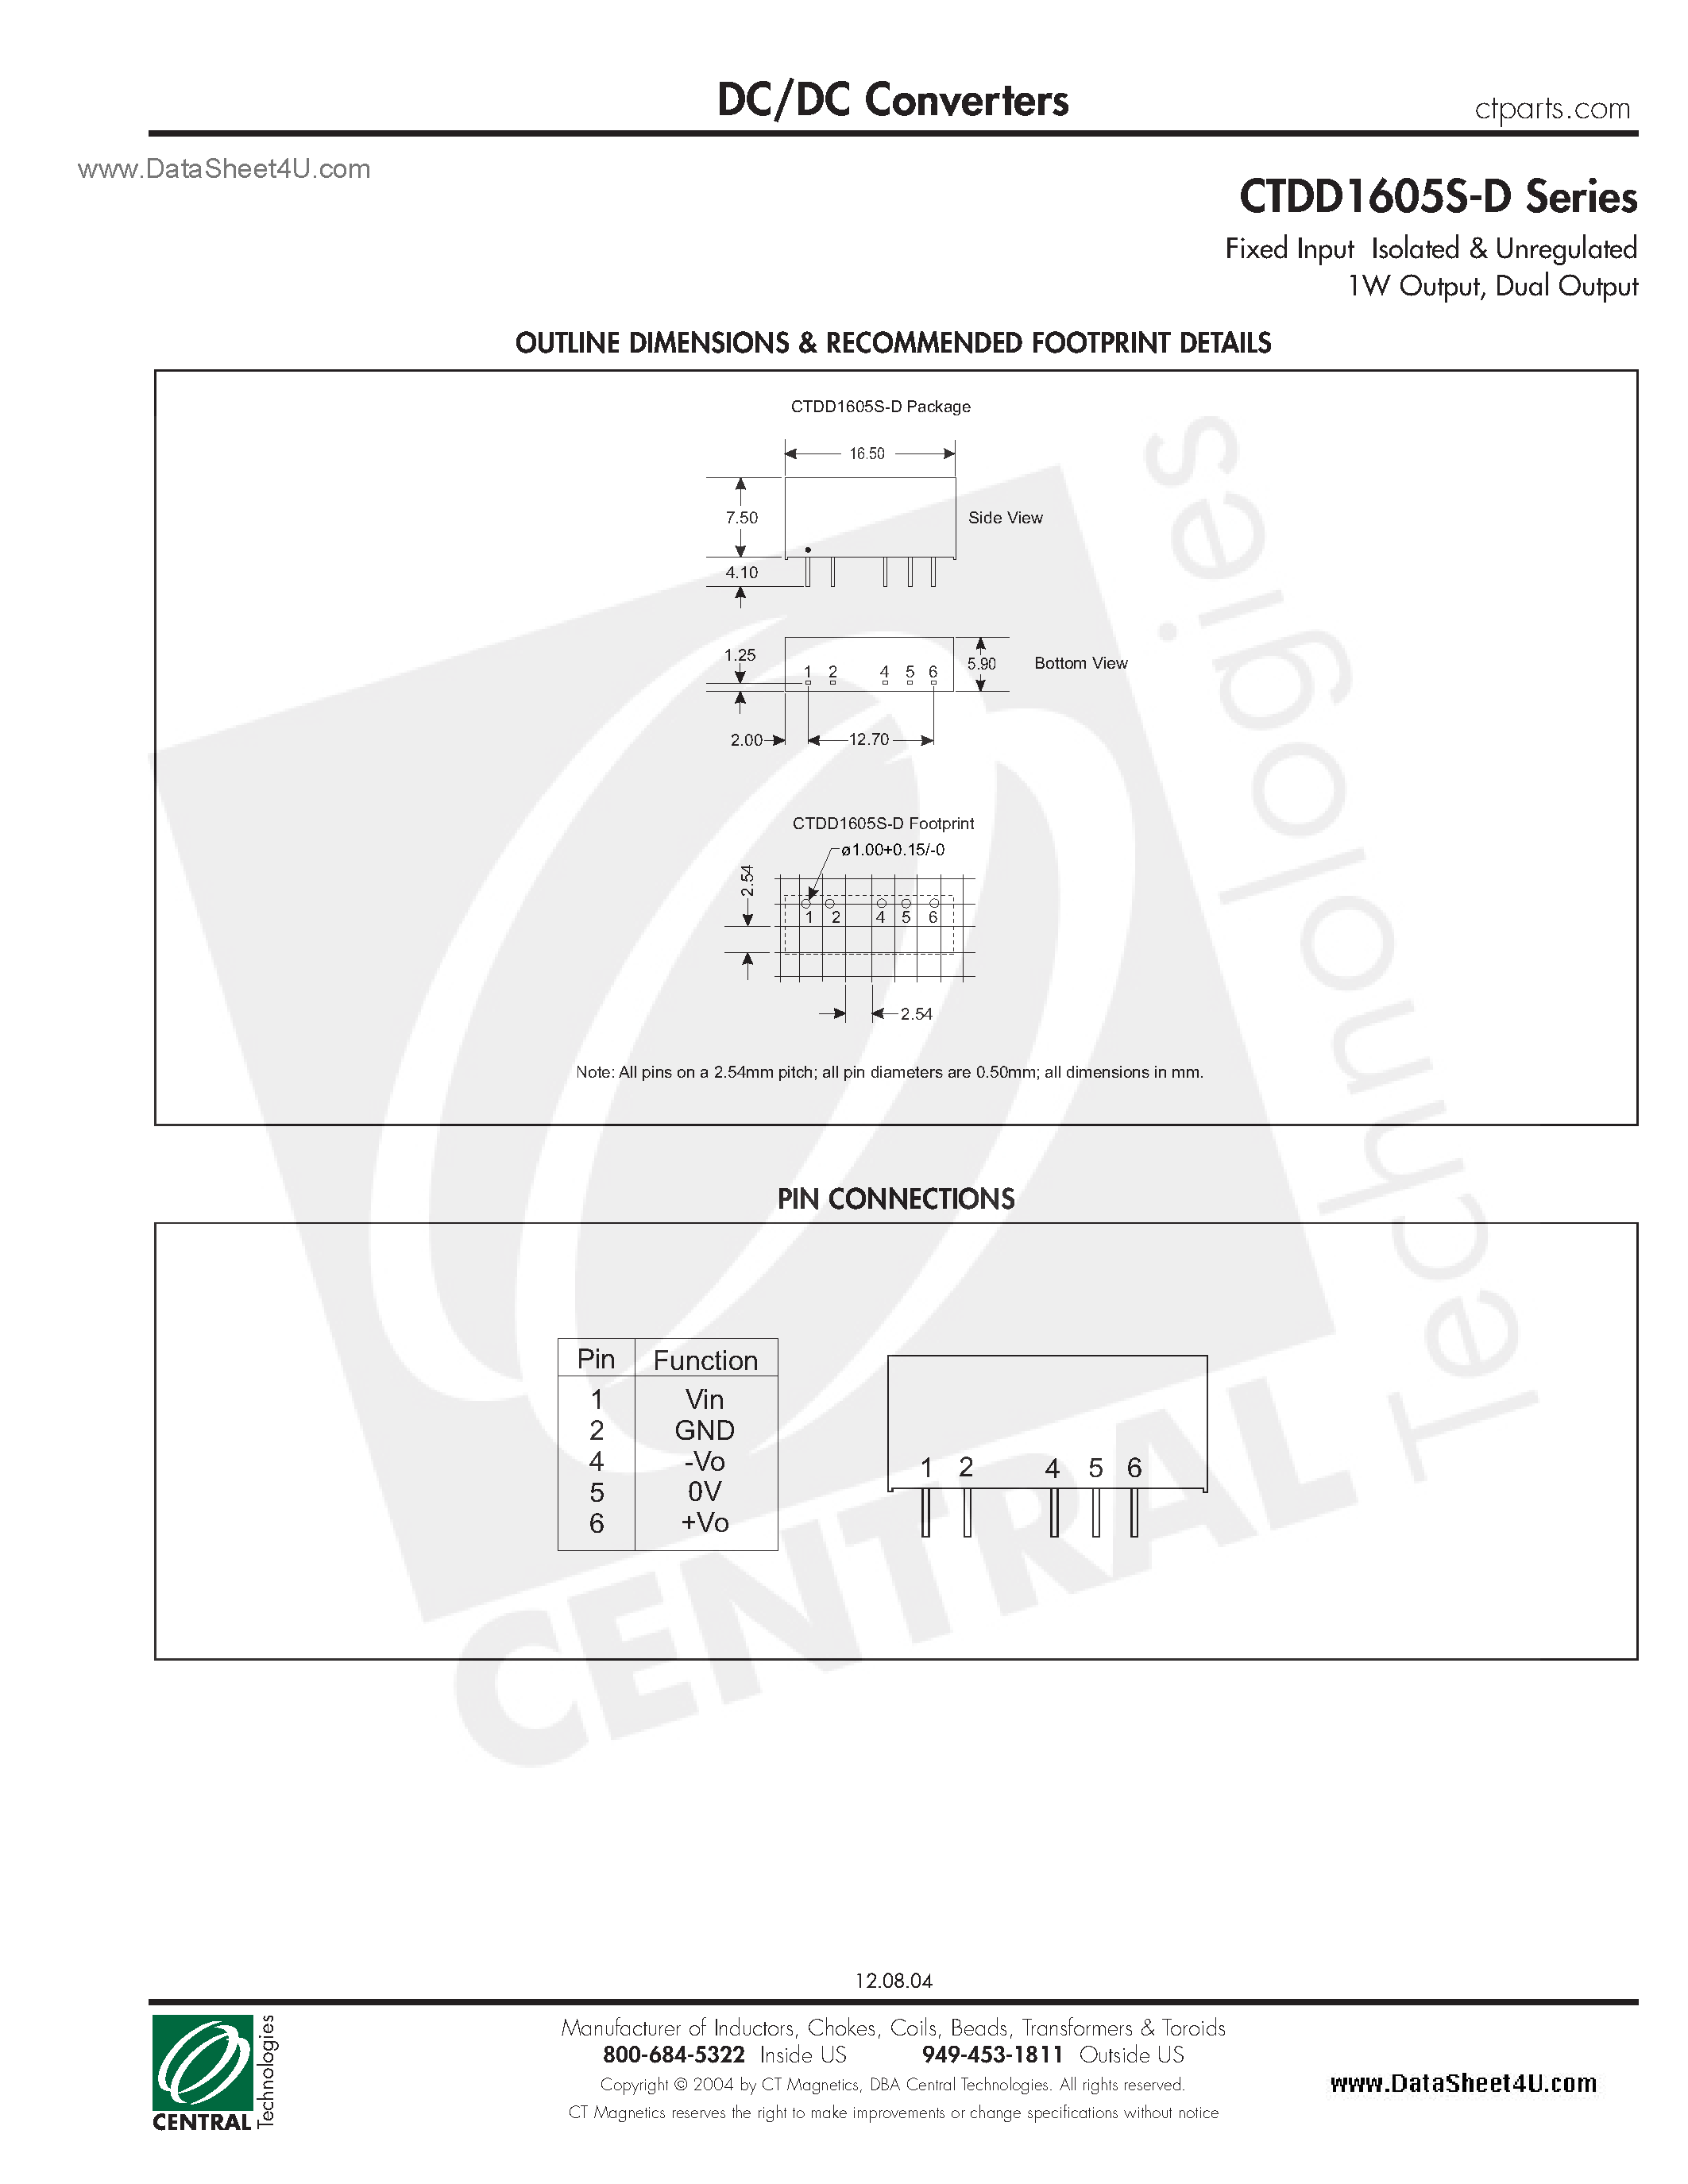 Datasheet CTDD1605S-D - DC/DC Converters page 2